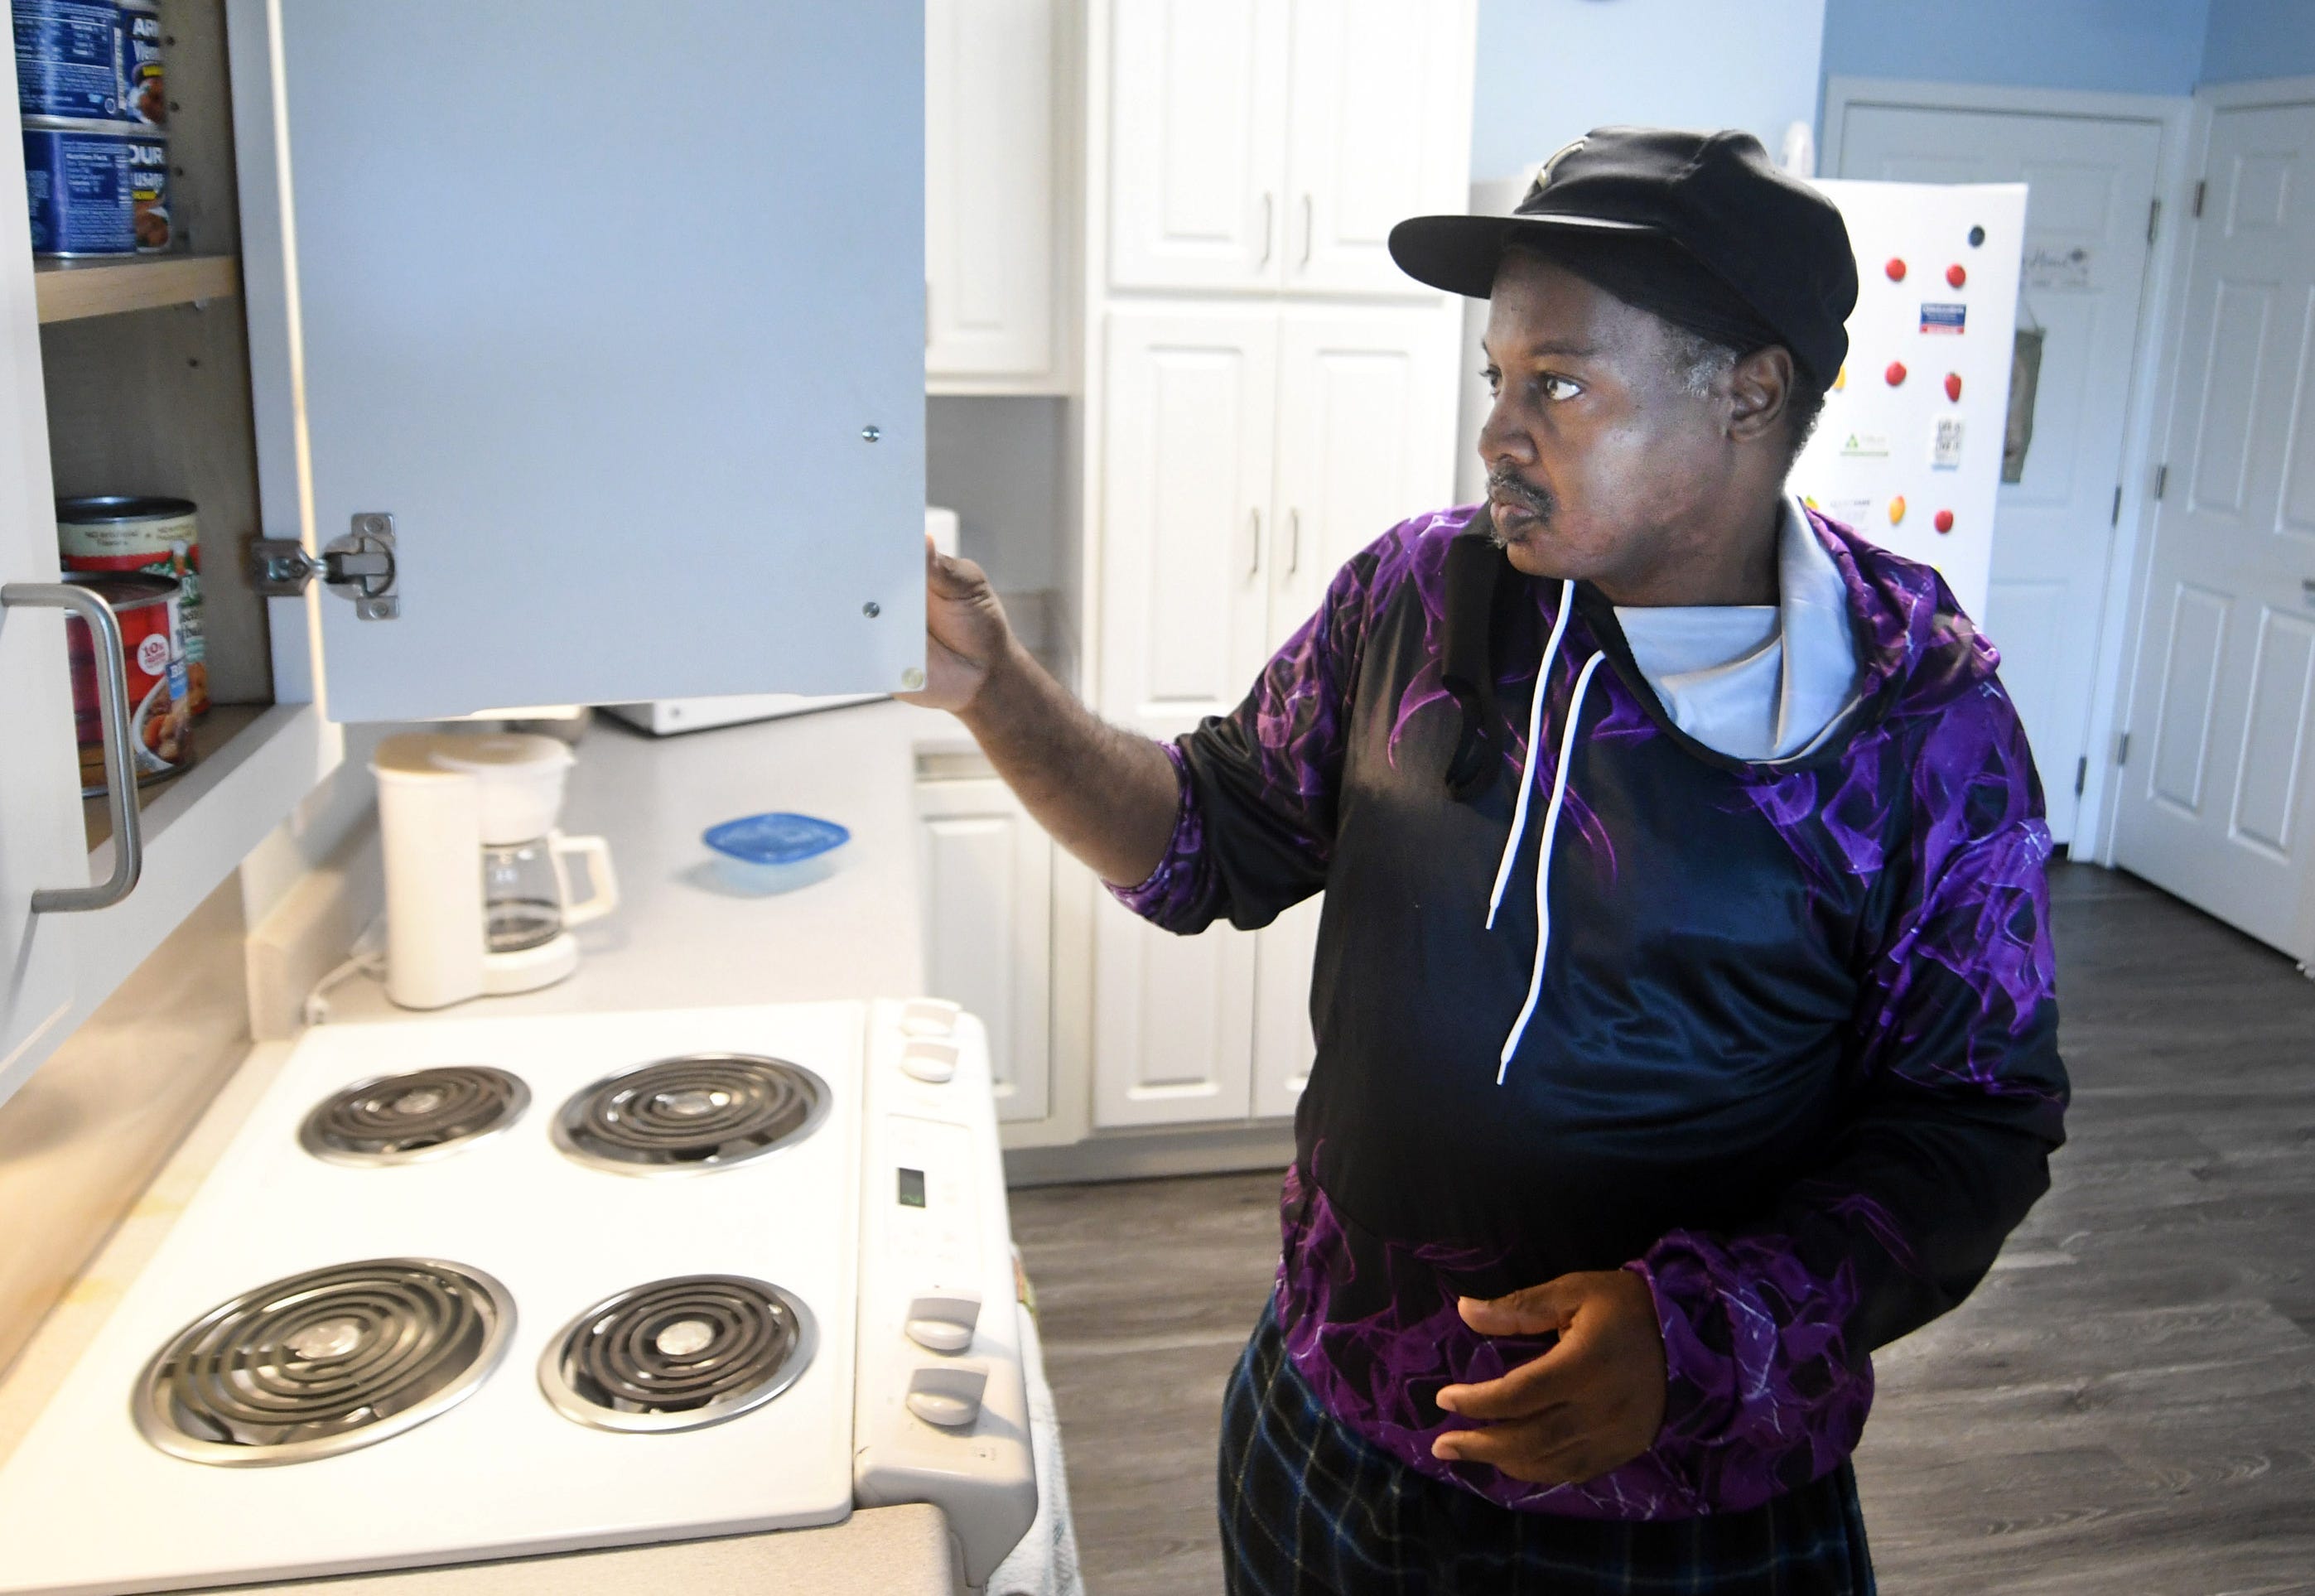 Greg Planter looks through his cabinets in his apartment at Lakeside Reserve in Wilmington, North Carolina, in July 2021. Planter was homeless for about a year before finding a spot at a local shelter in 2016. While staying there, he was able to get on disability and obtain housing vouchers, which led him to find a more permanent housing option.